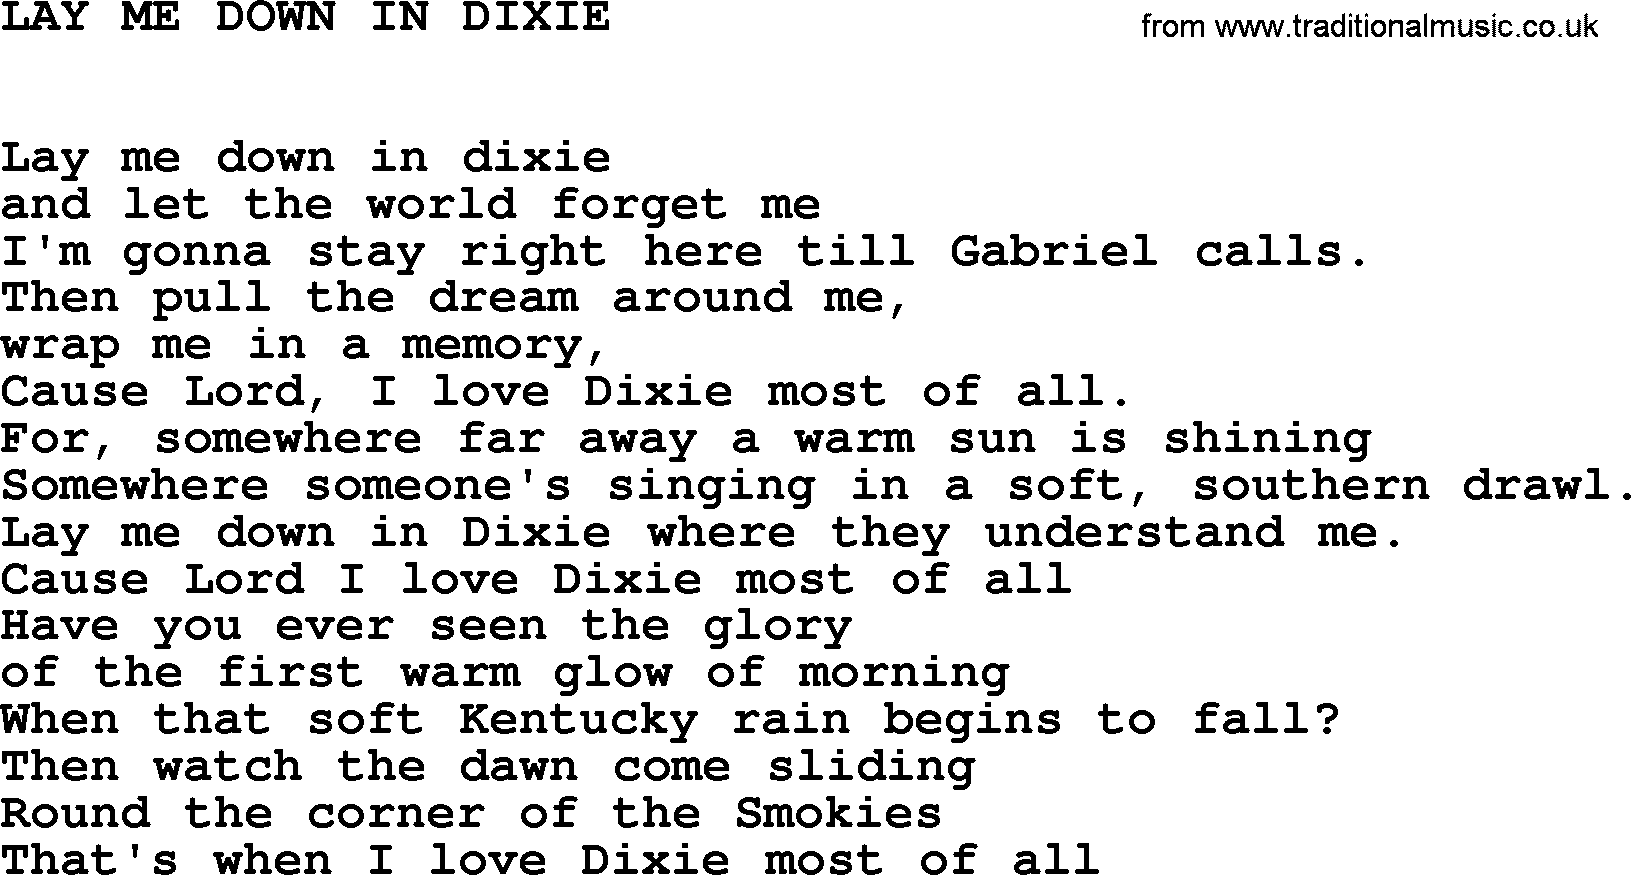 Johnny Cash song Lay Me Down In Dixie.txt lyrics